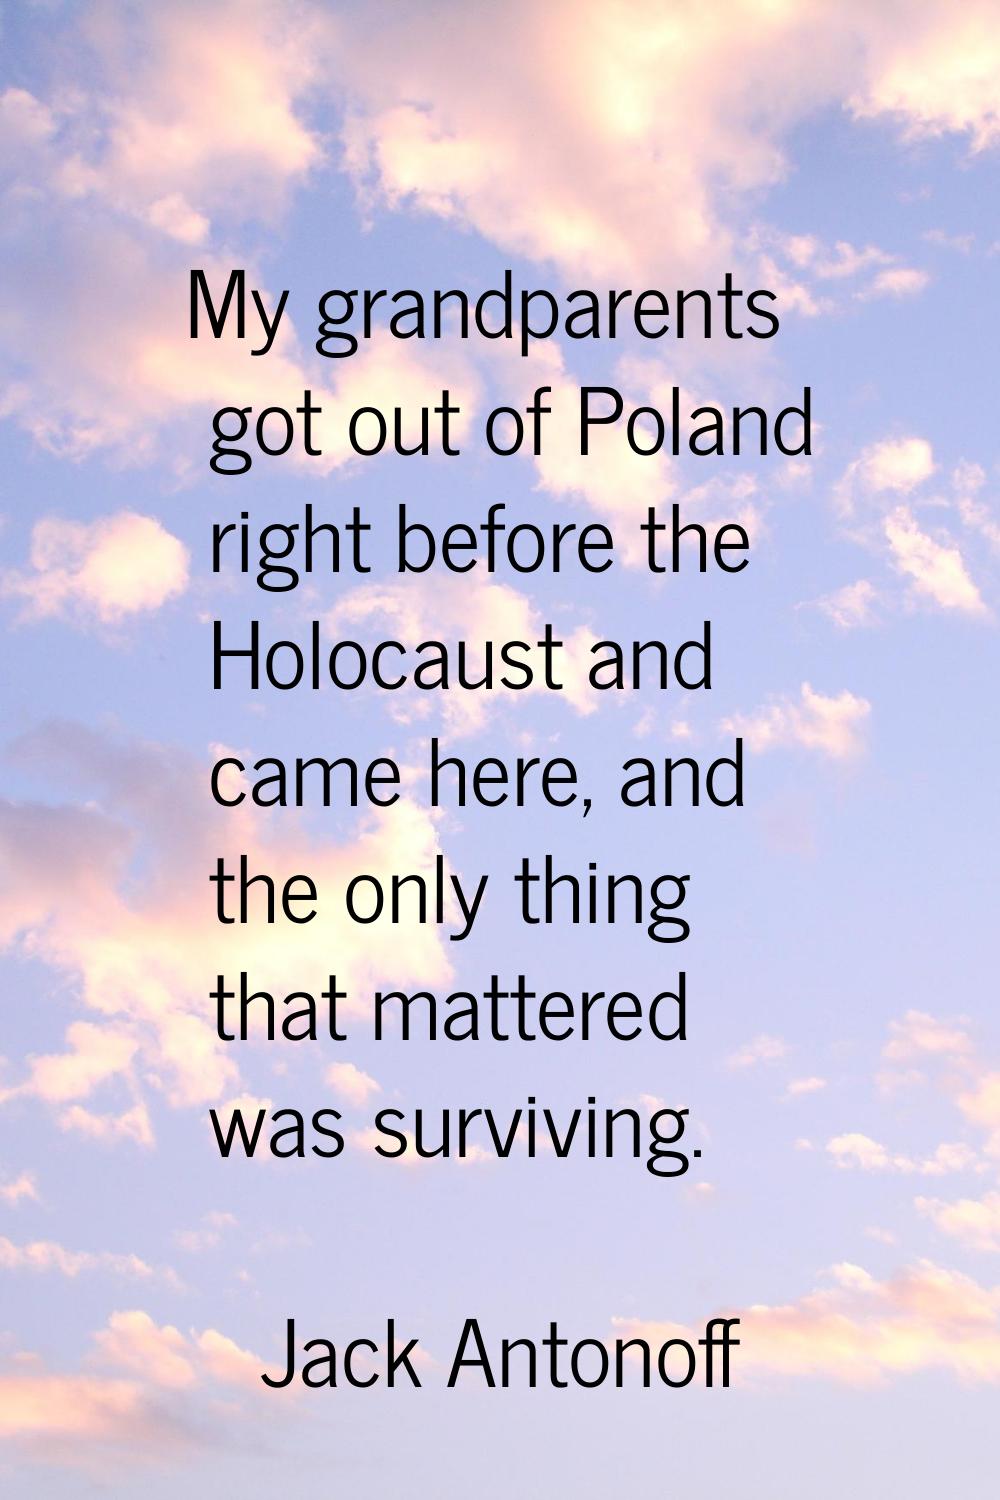 My grandparents got out of Poland right before the Holocaust and came here, and the only thing that